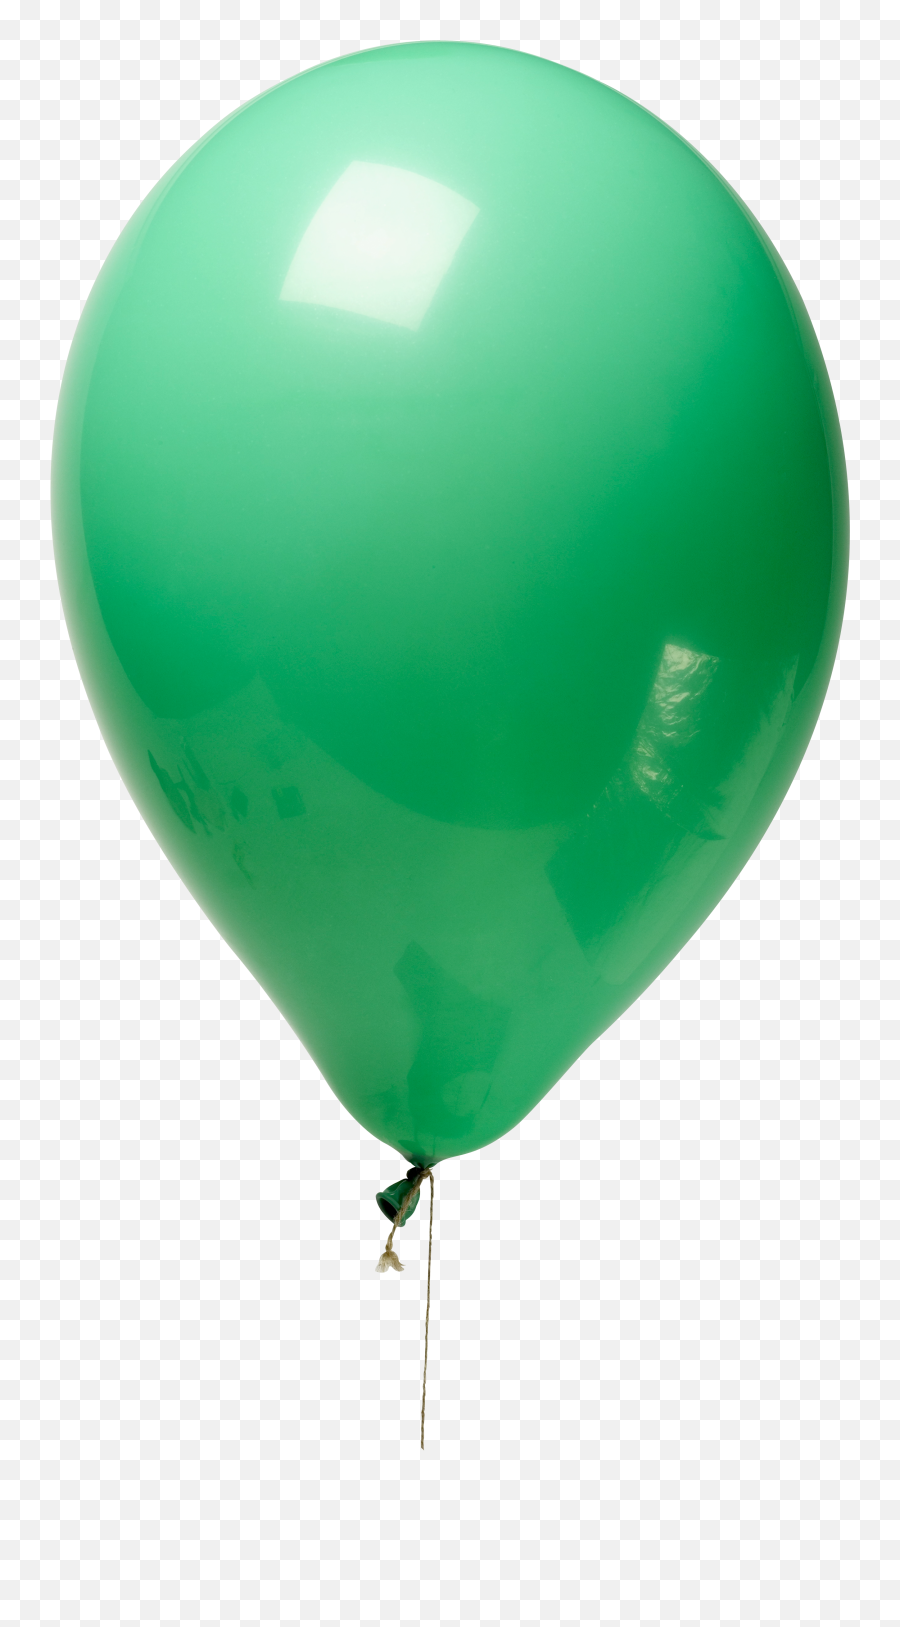 Balloon Png Images Free Picture - Globos Verde Jade Animado,Real Balloons Png